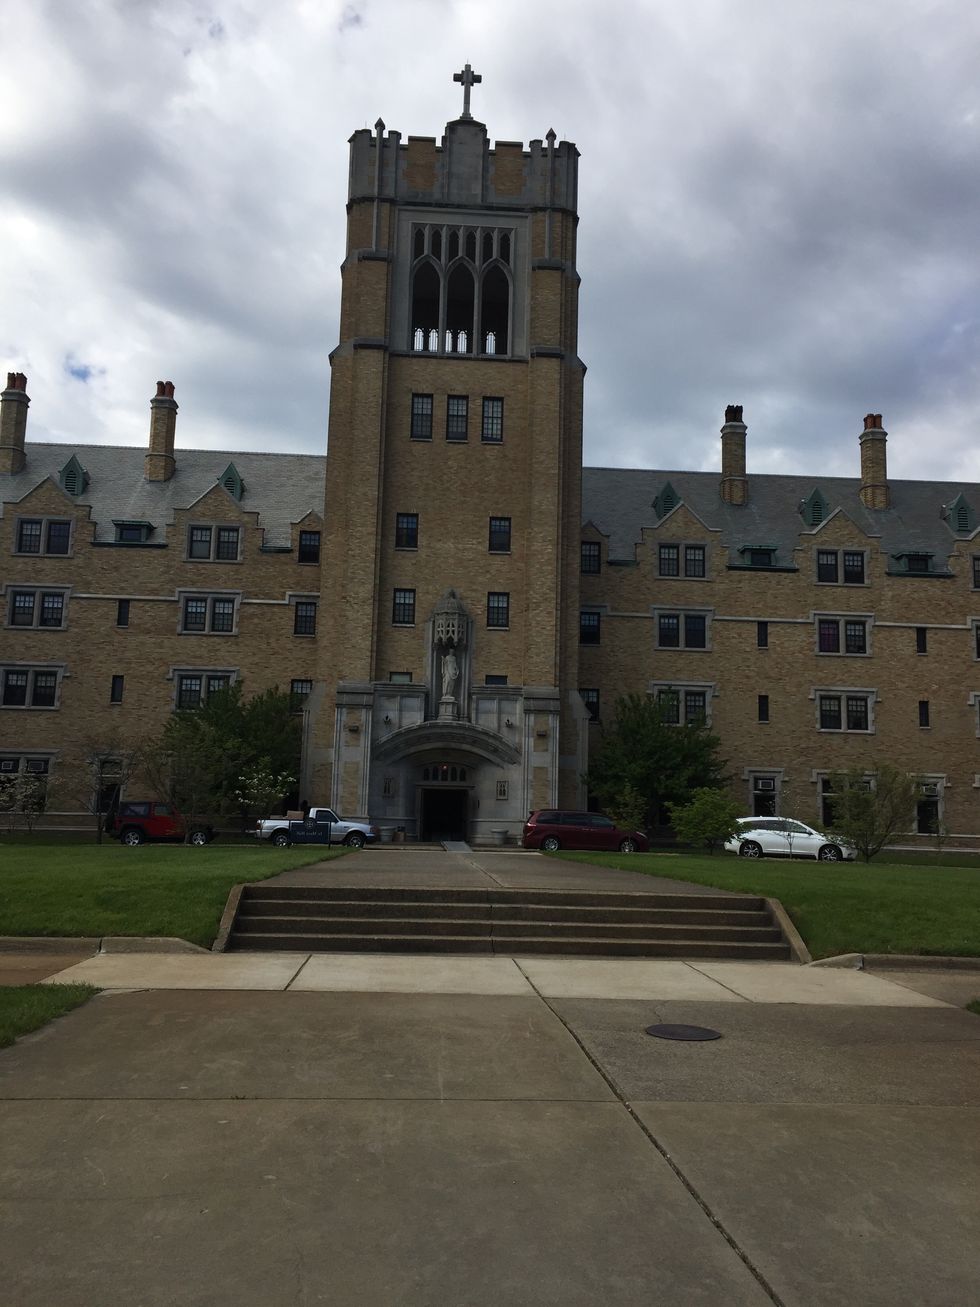 8 Things I Learned My First Week At College